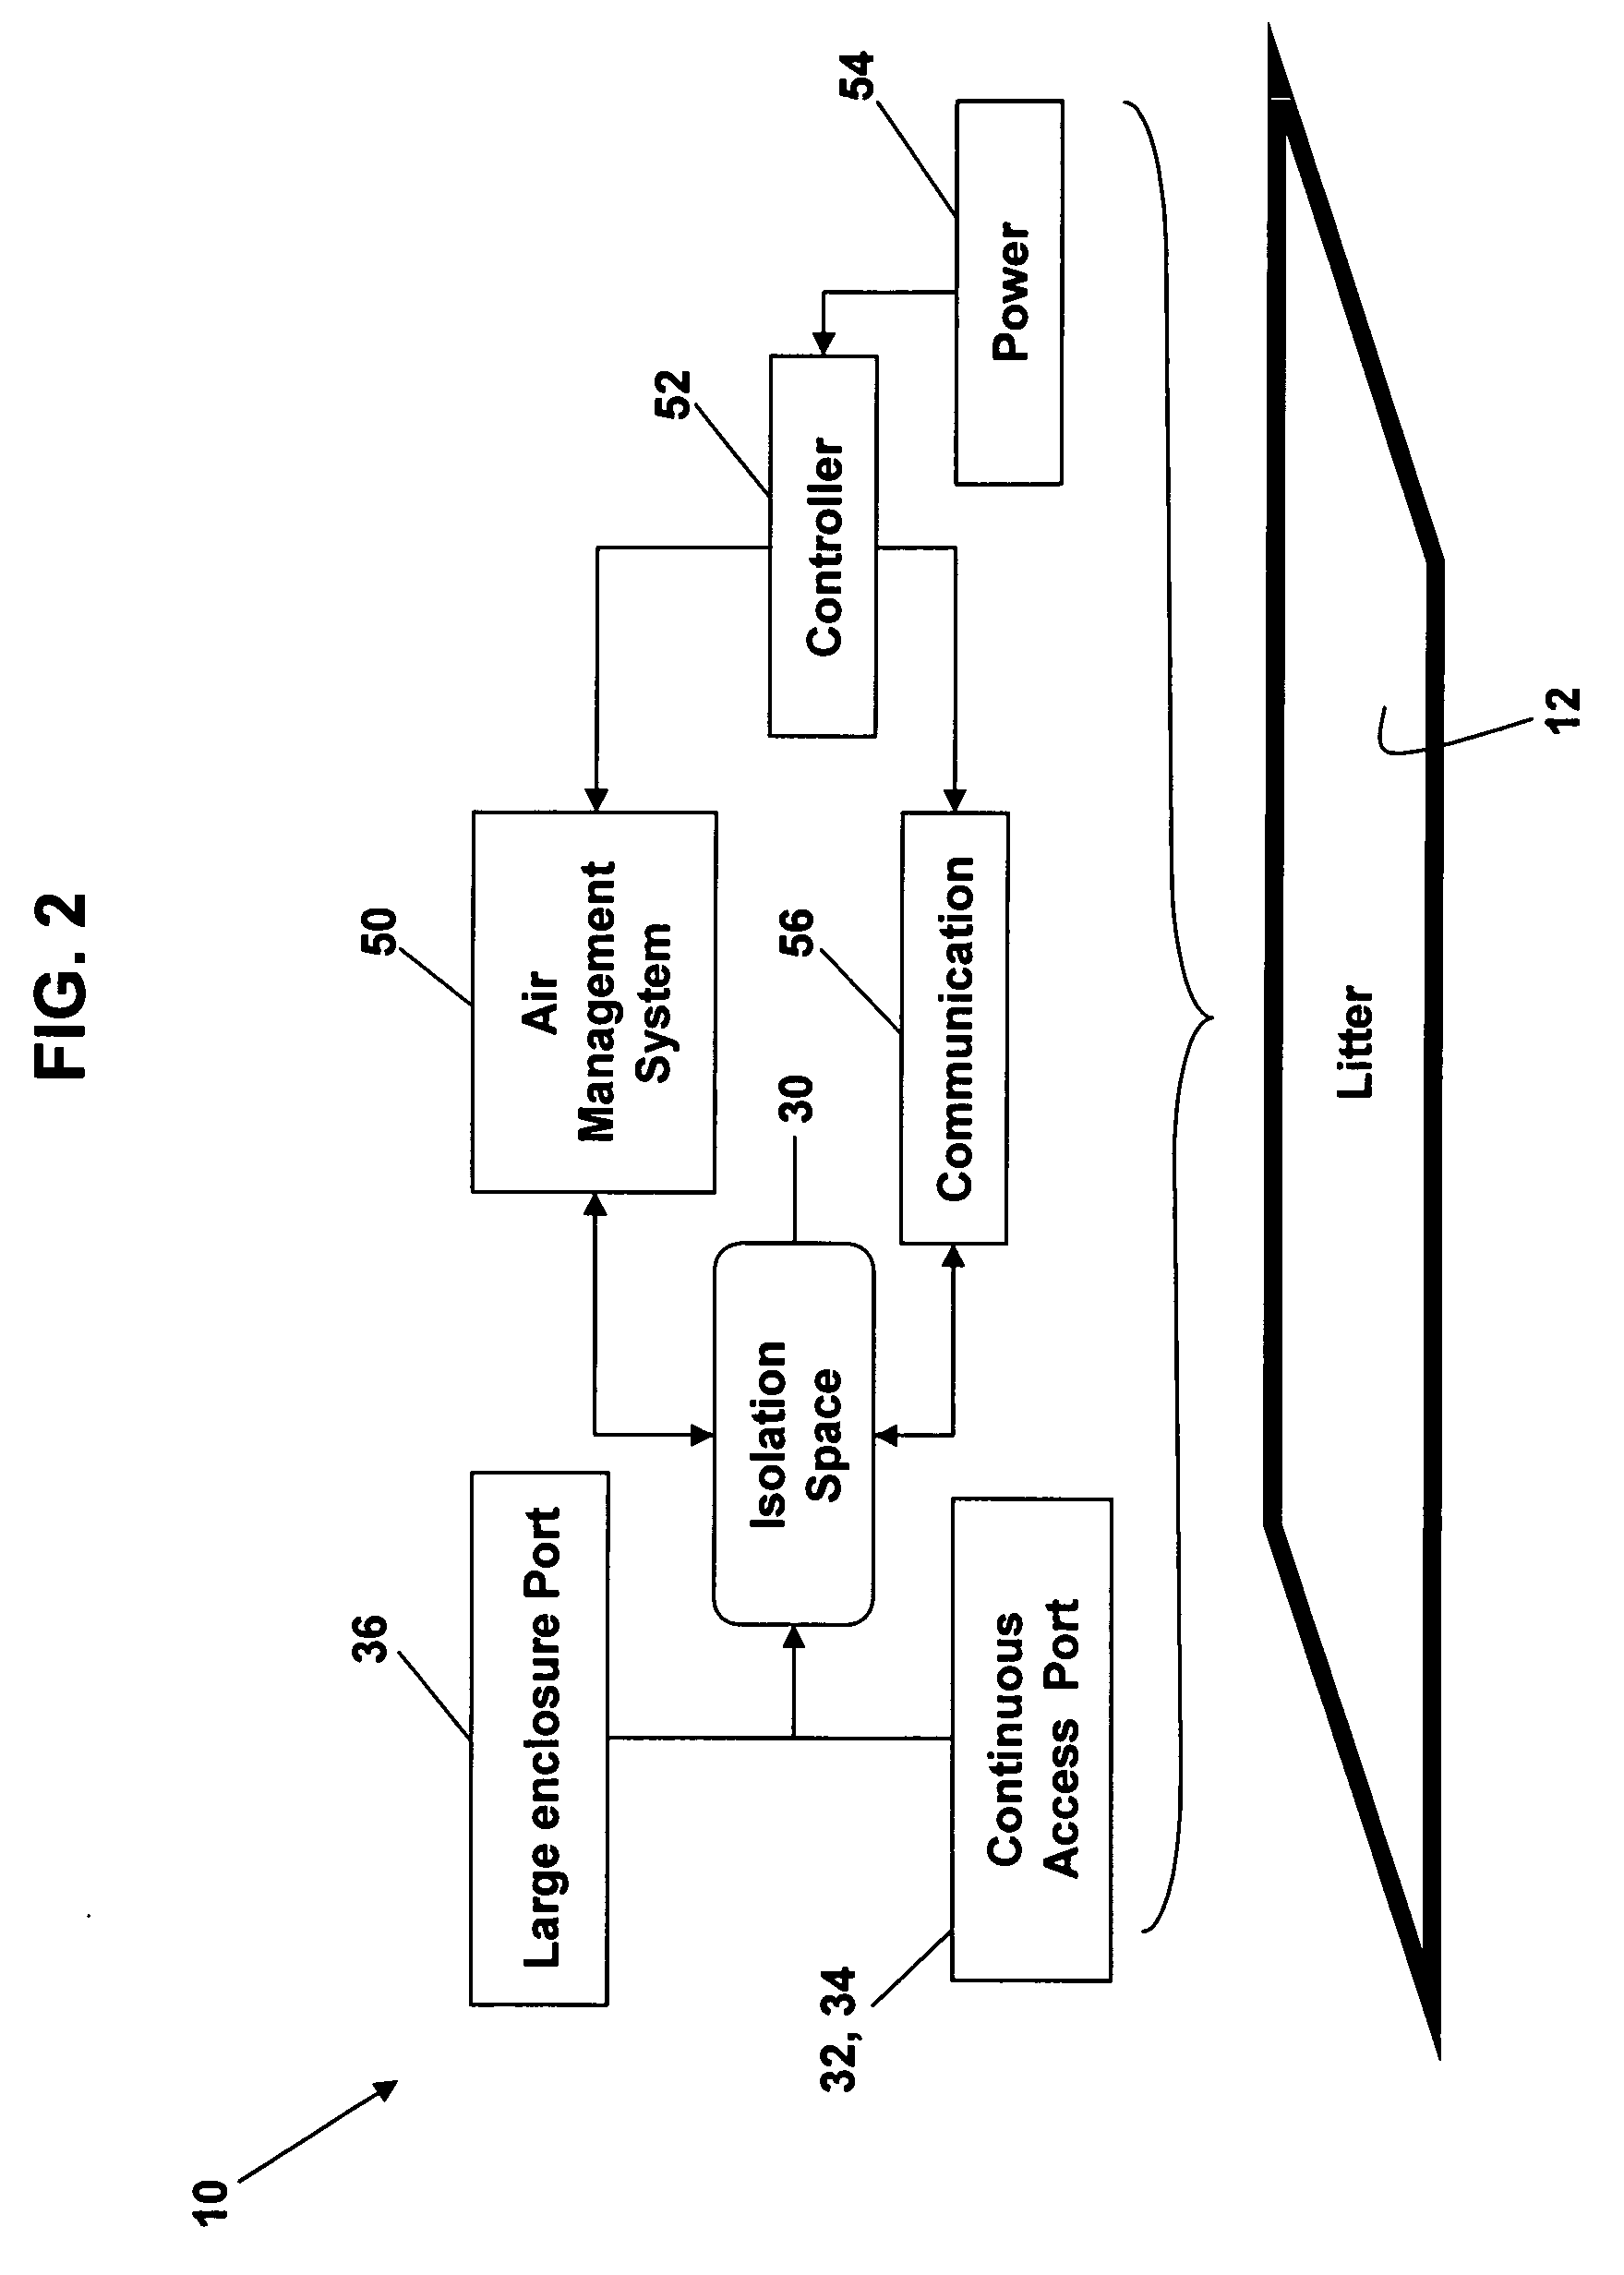 Apparatus and method for providing continuous access to an isolation space while maintaining isolation